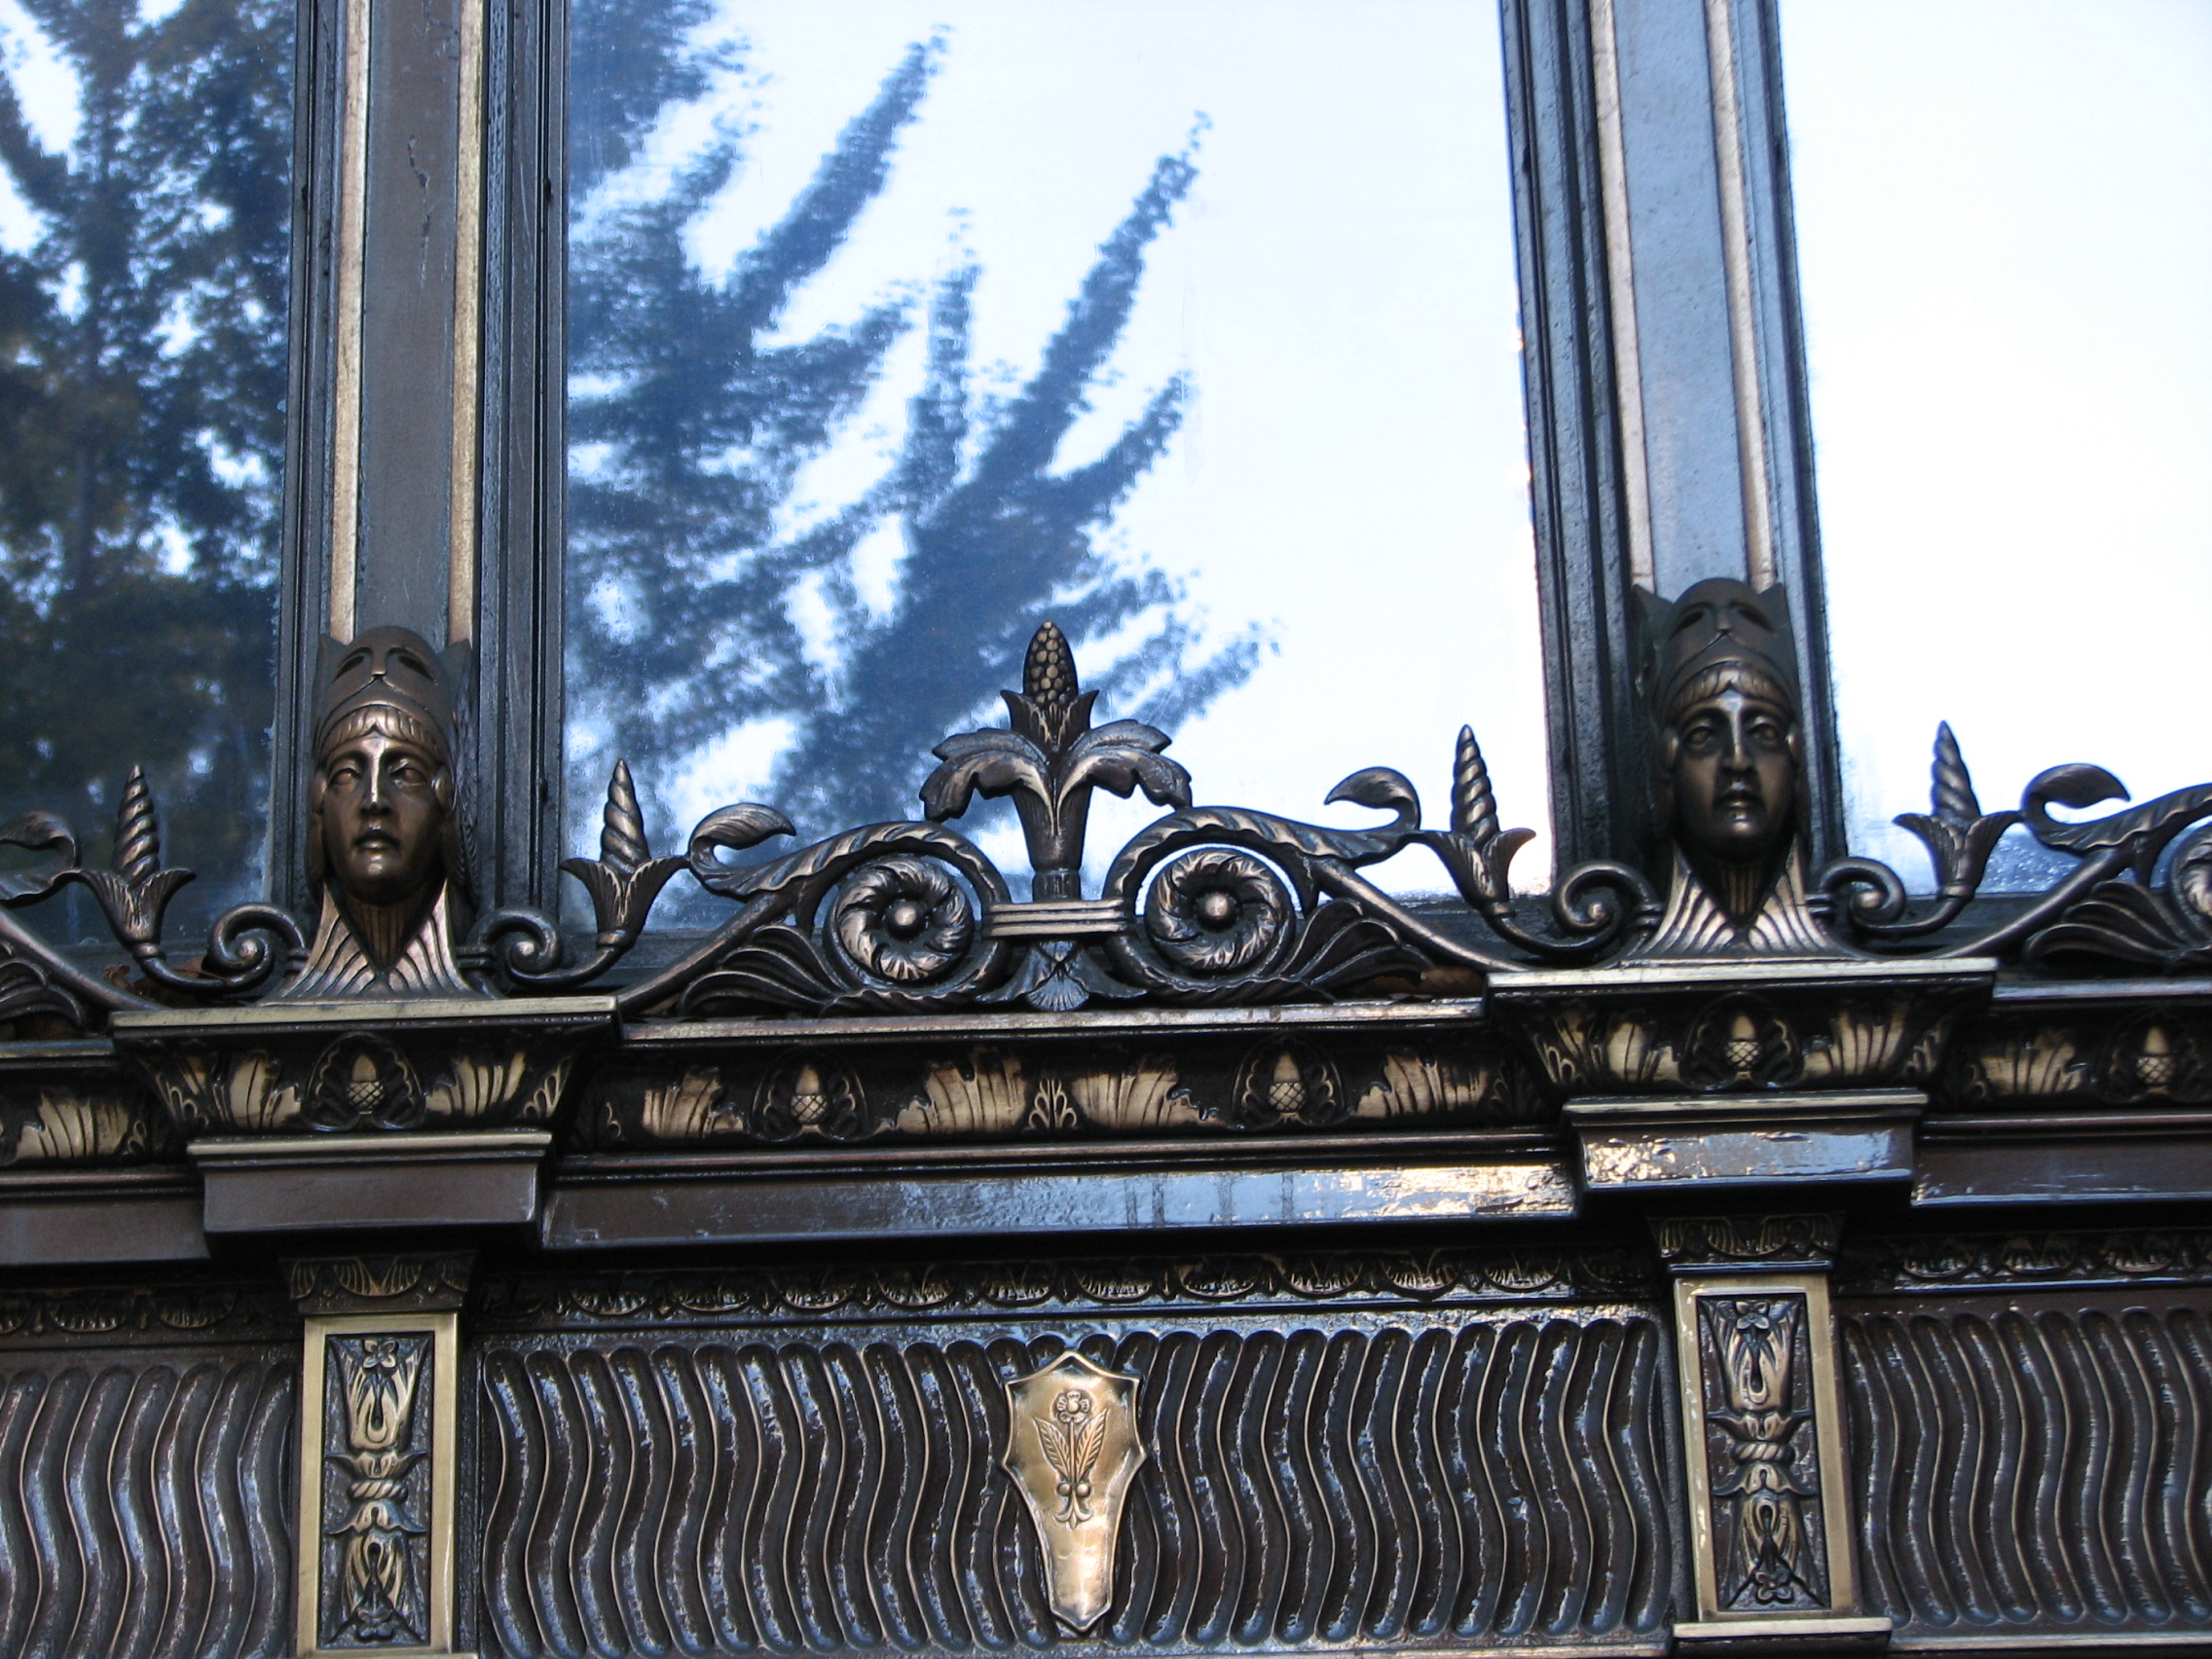 Fine ironwork surrounds the entrances to the building.